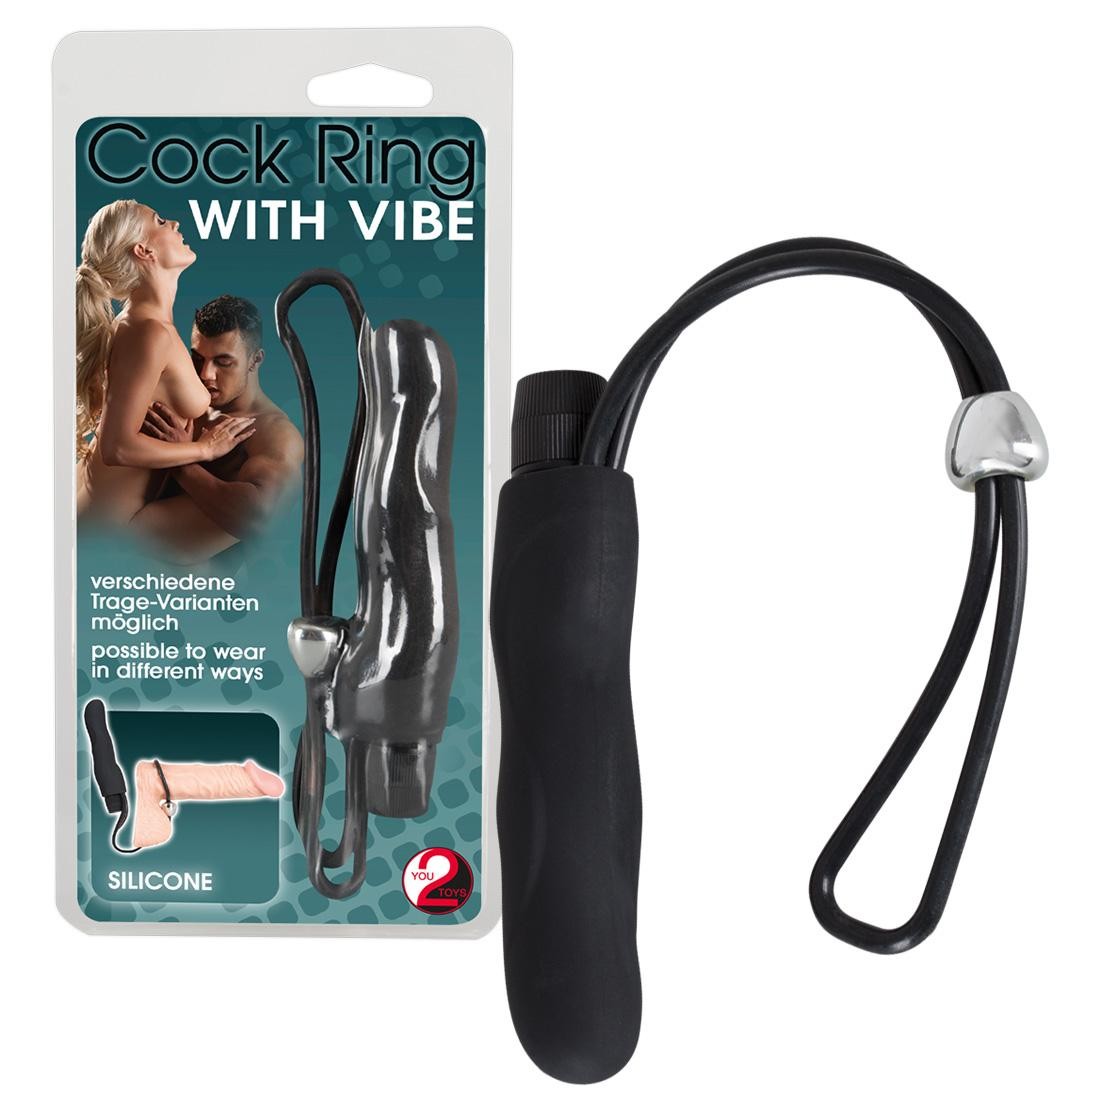  You2Toys  -  Cockring  with  vibe  -  Vibrator  mit  Penisring 